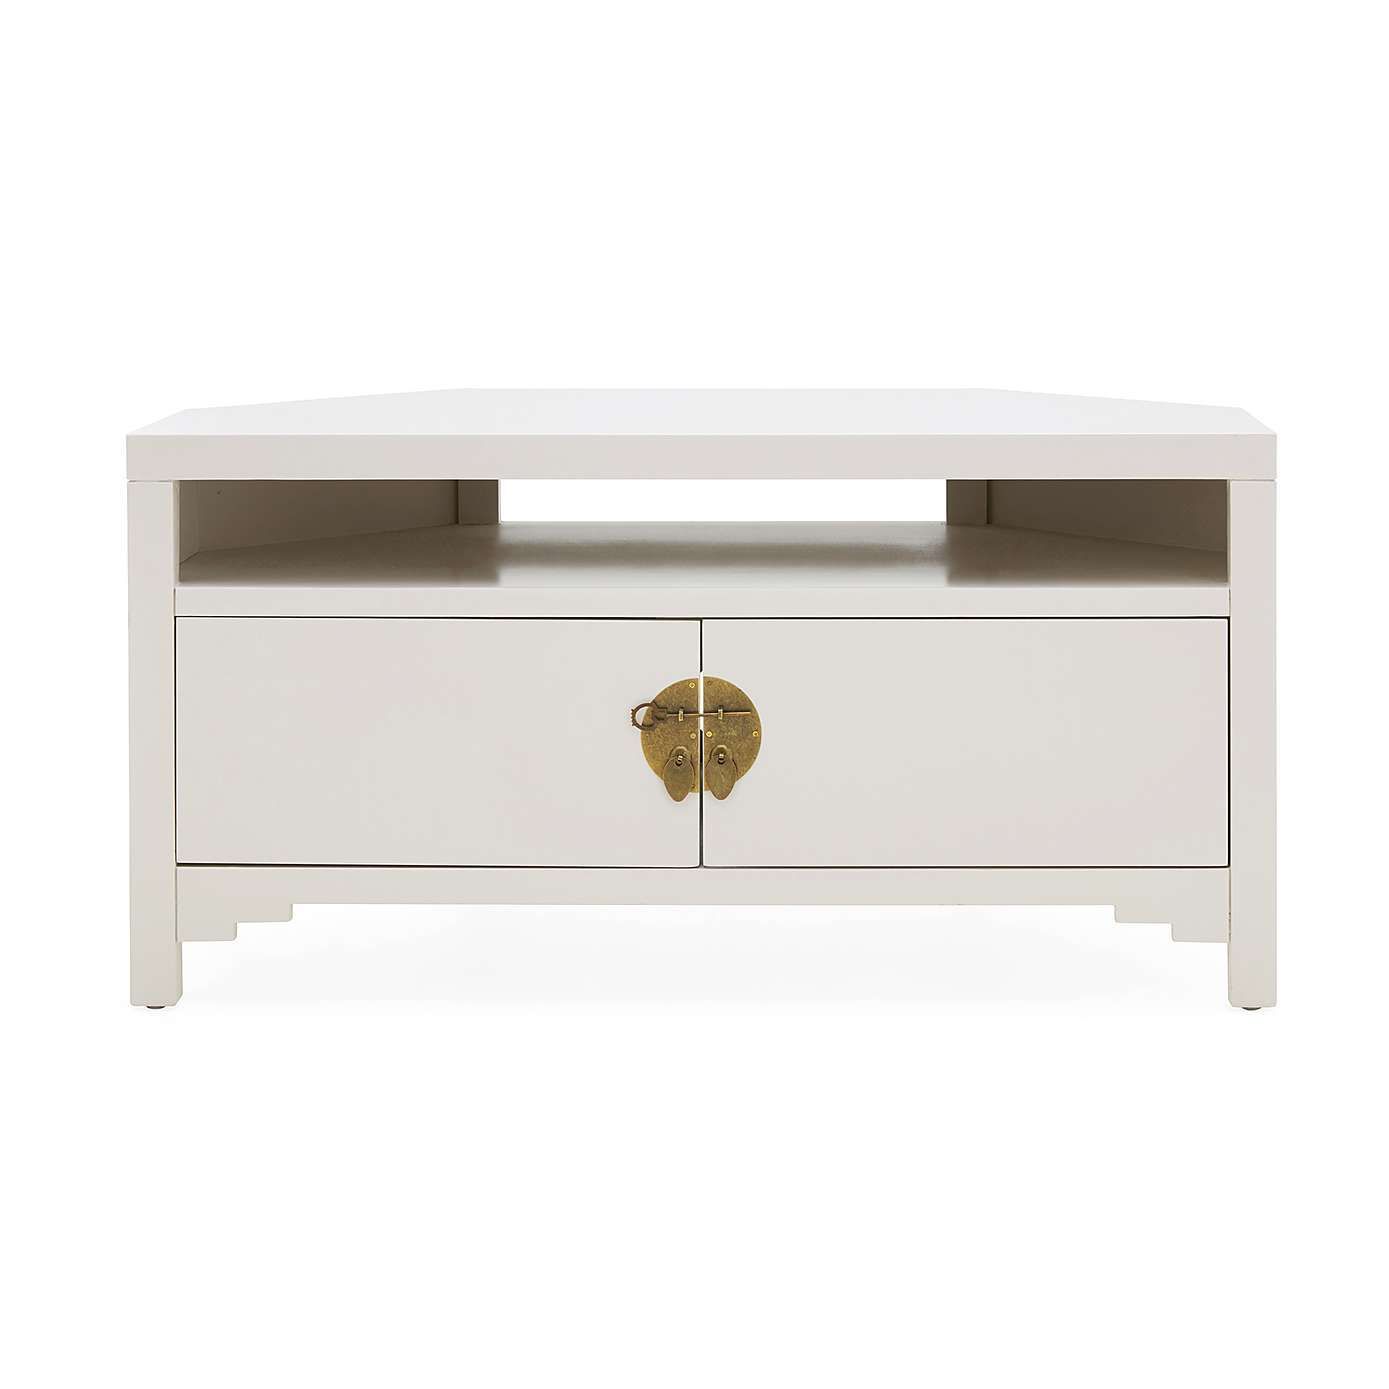 Hanna Oyster Corner Tv Stand | Dunelm (with Images Inside Hanna Oyster Corner Tv Stands (Photo 2 of 9)